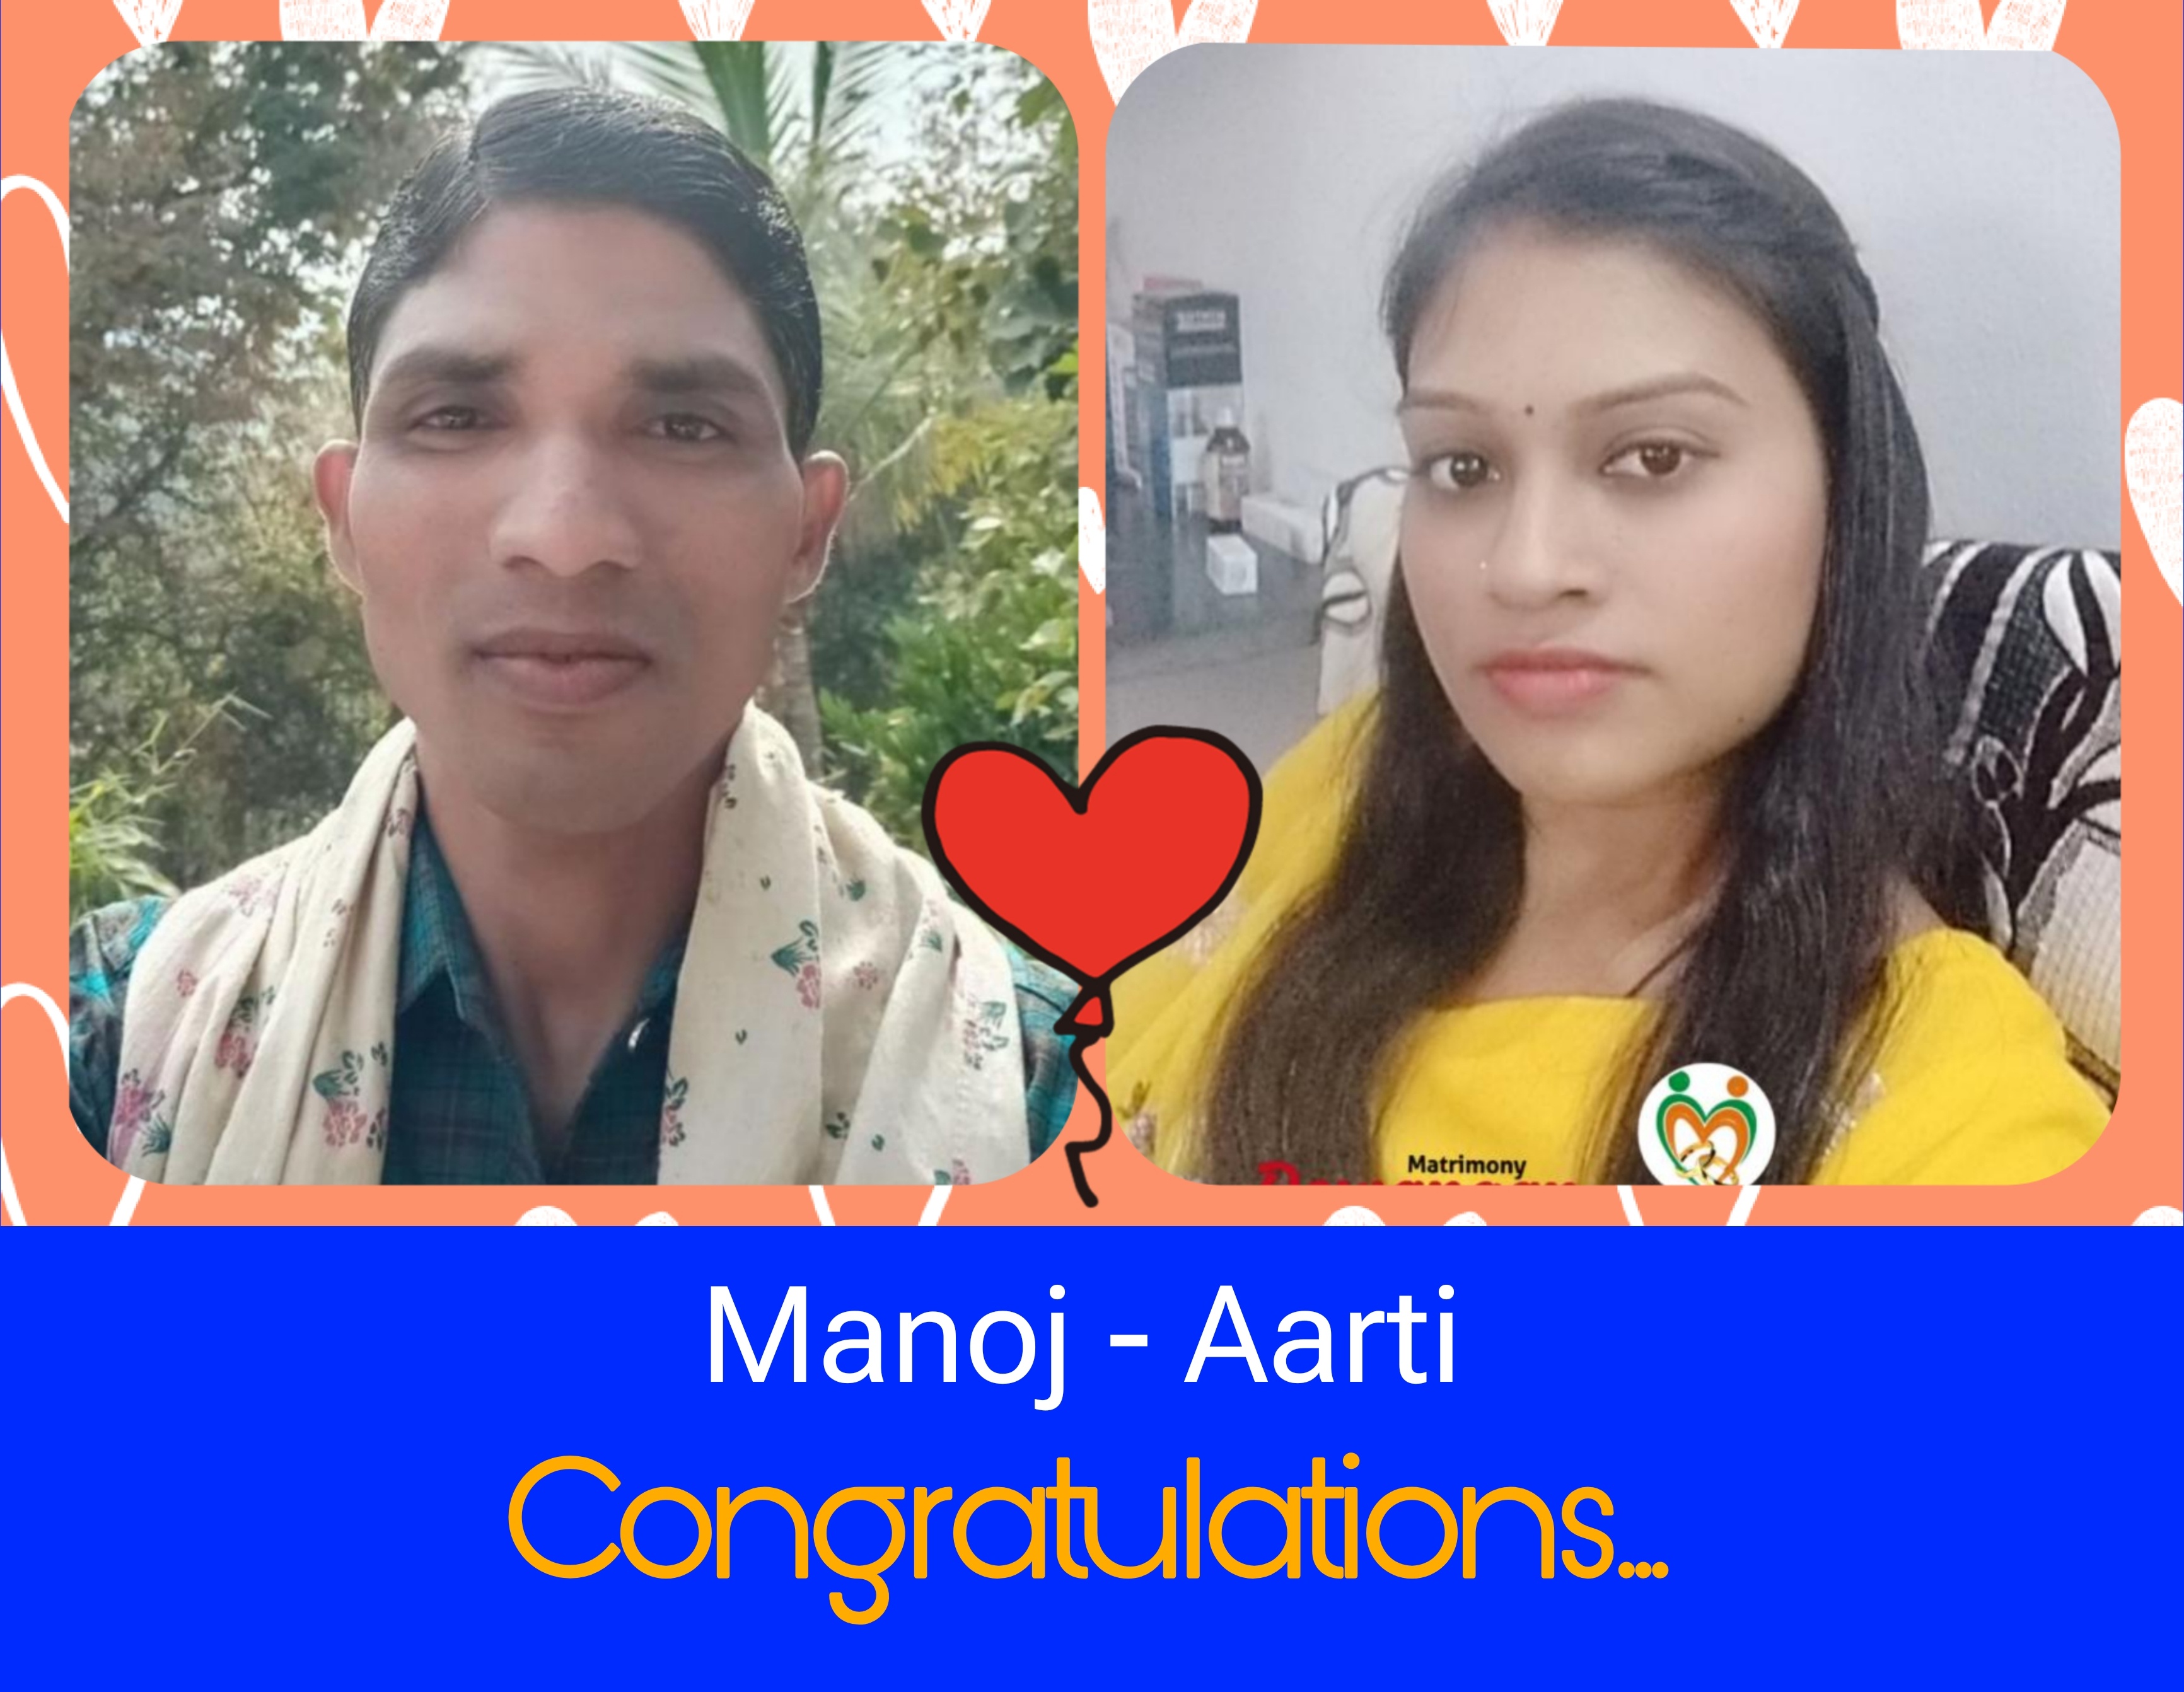 Manoj and Aarti